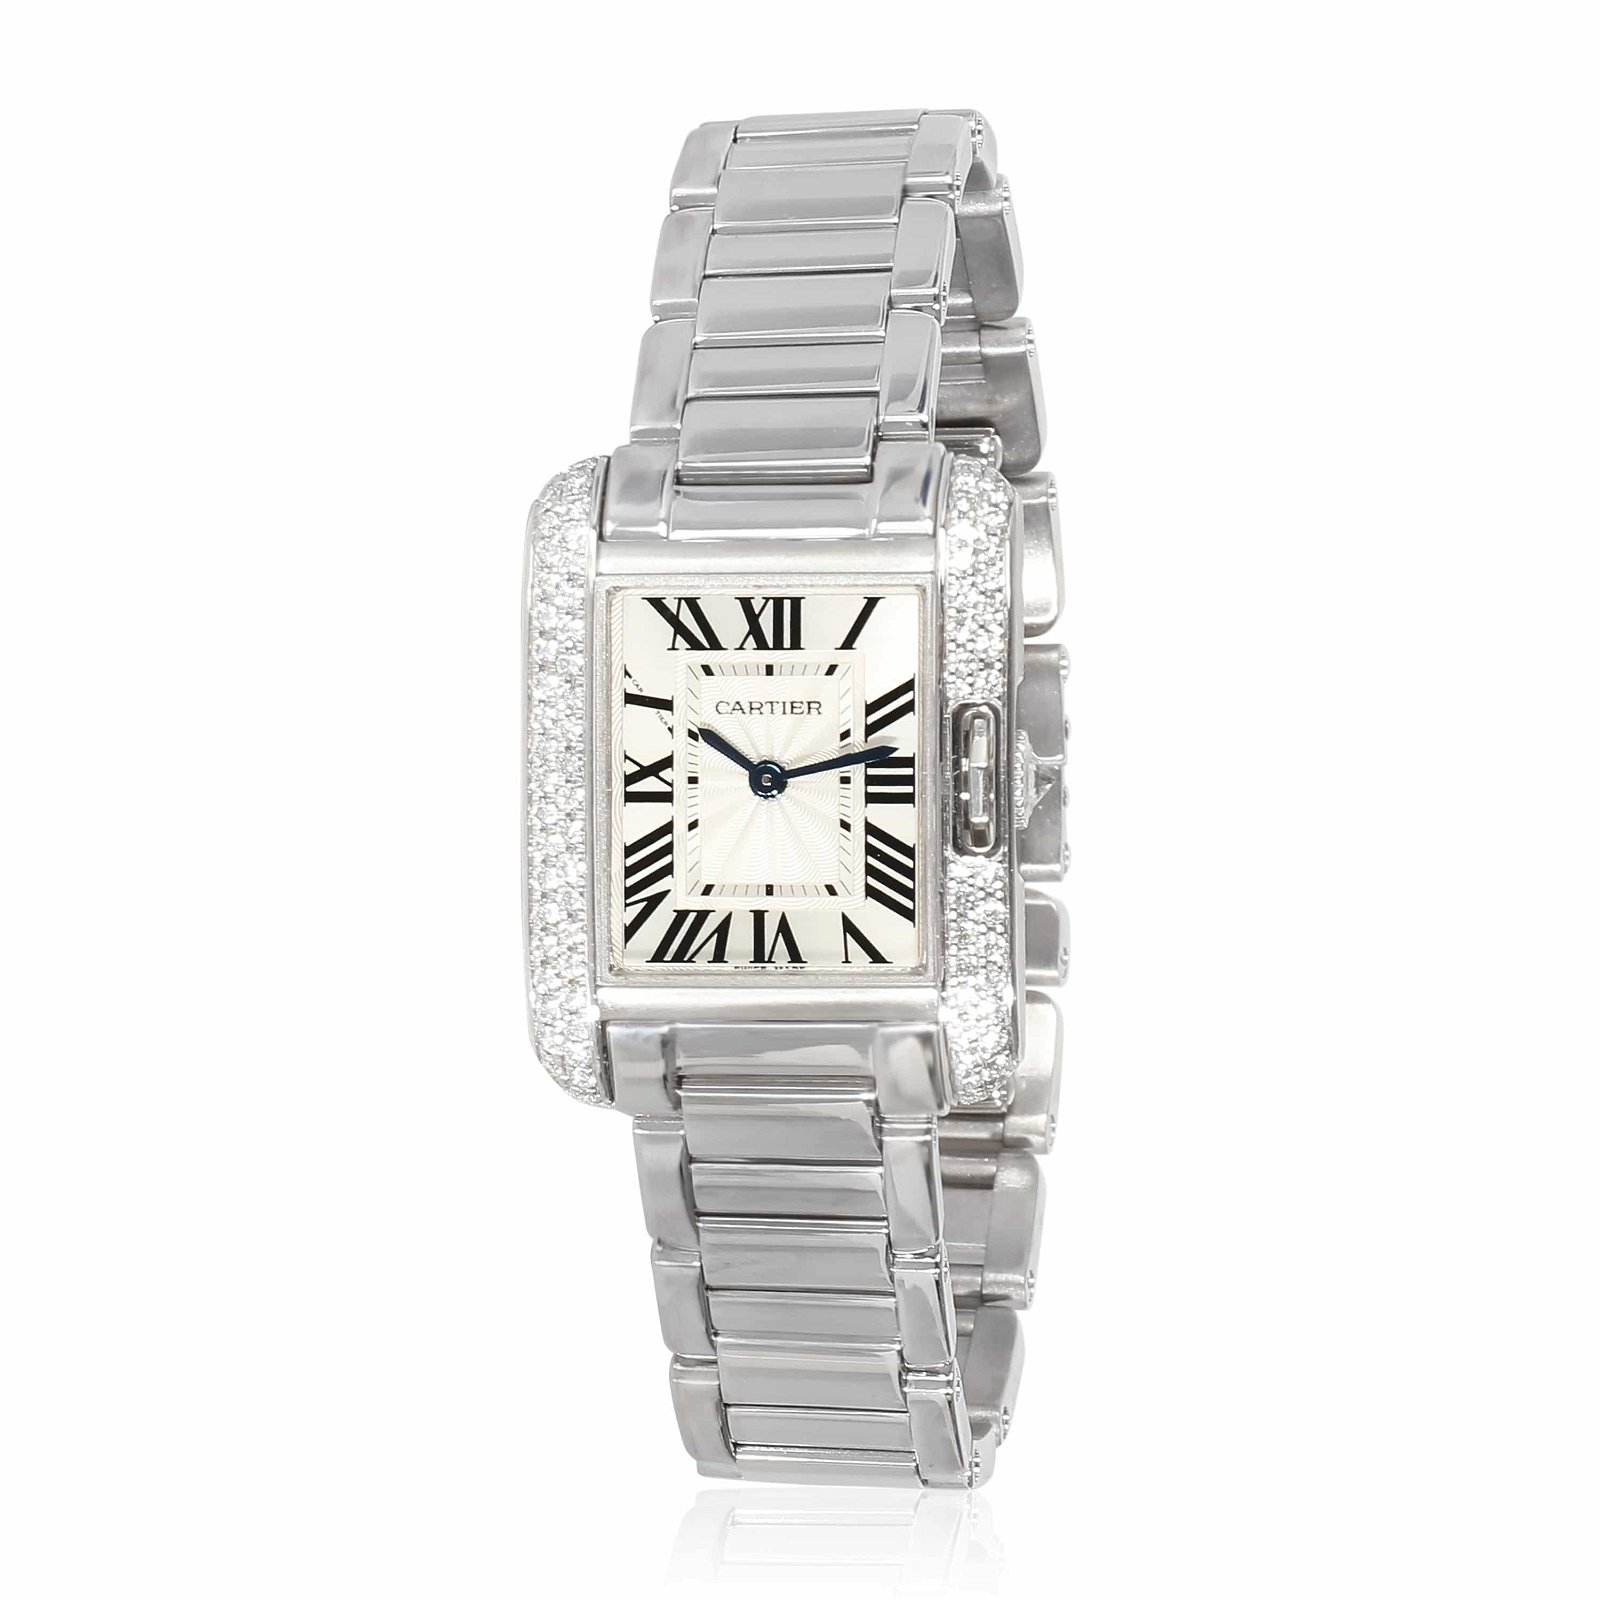 Image of Cartier Tank Anglaise de Cartier WT100008 Women's Watch in White Gold